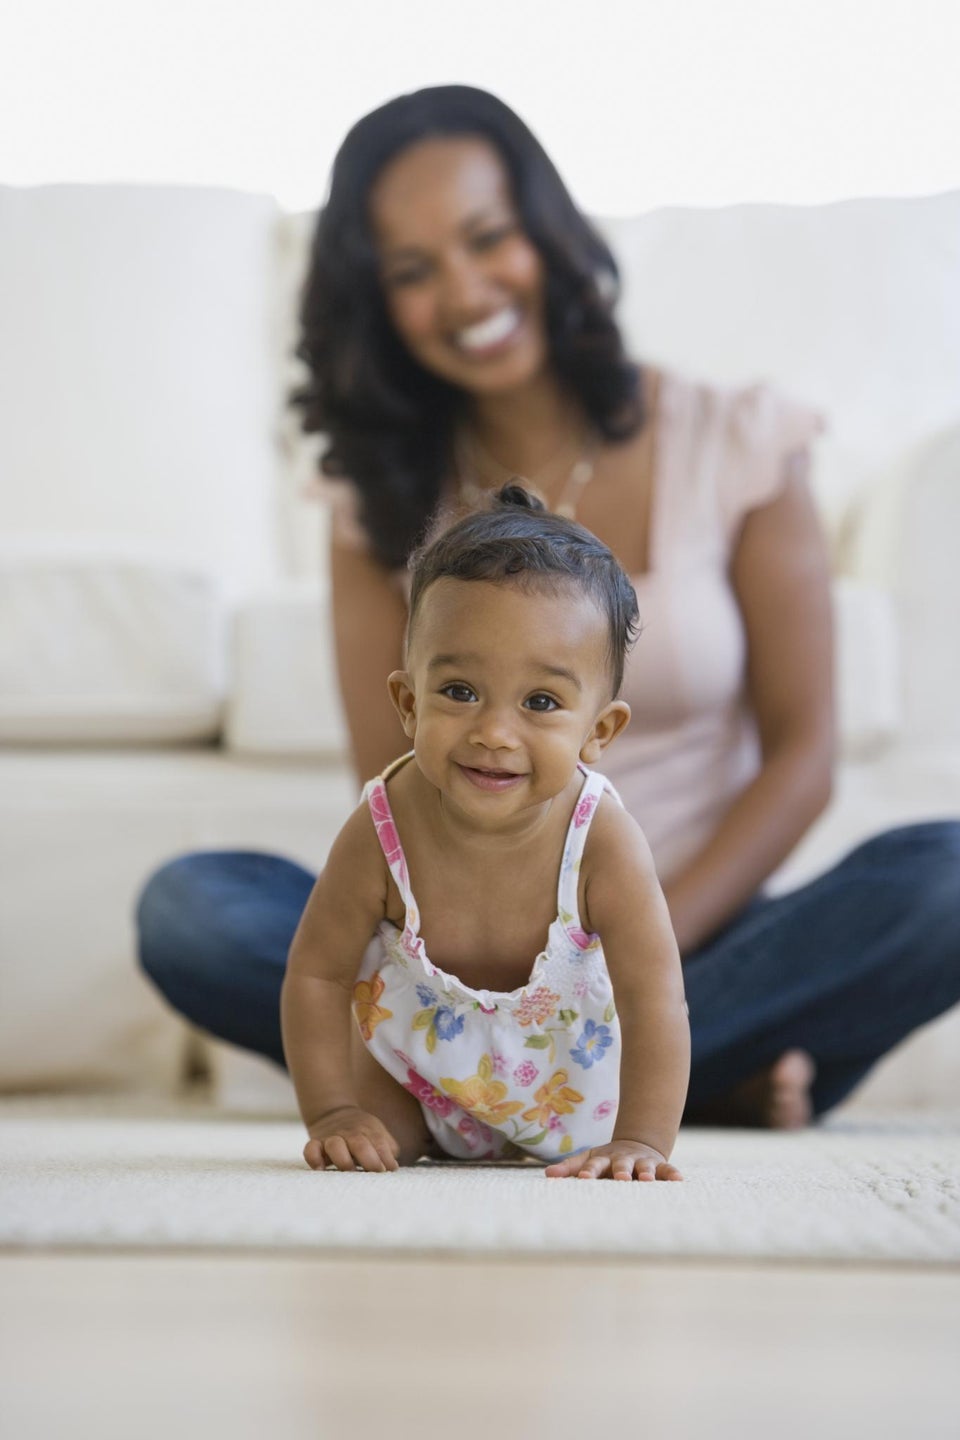 ESSENCE Poll: What’s Your Ideal Parenting Style?